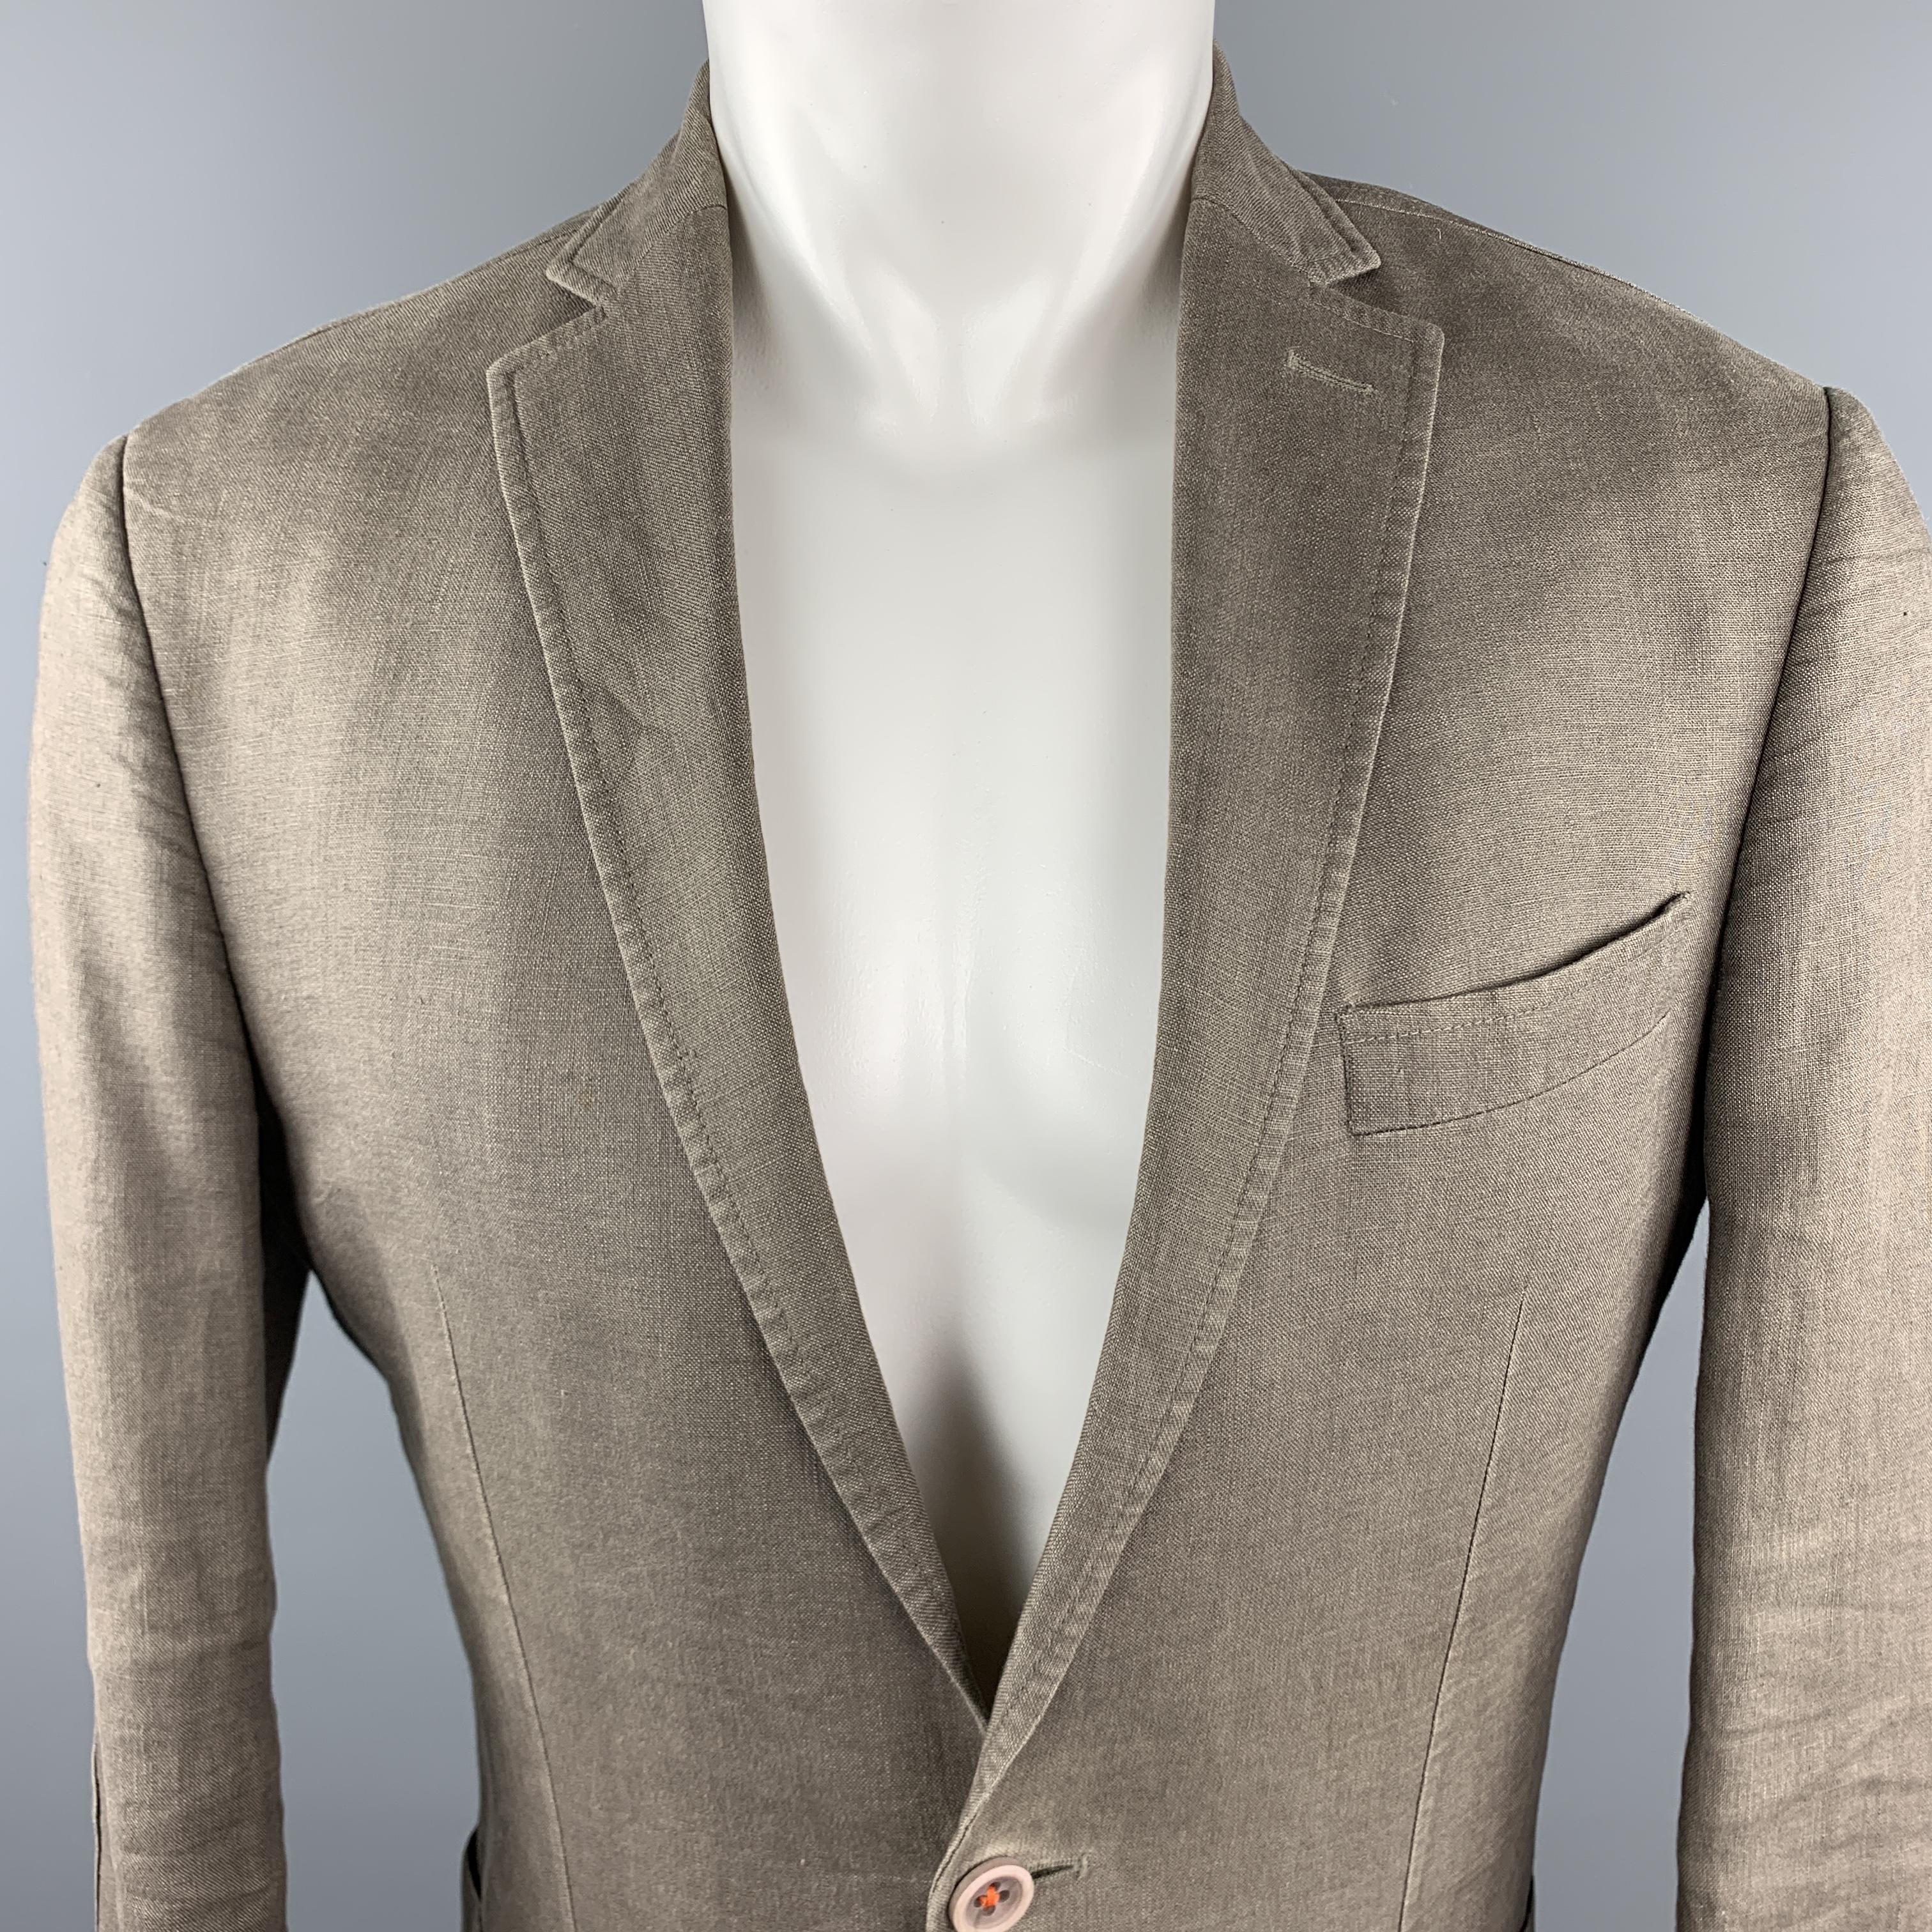 TALLIA Sport Coat Jacket comes in a taupe tone in a solid linen material, with a notch lapel, slit and patch pockets, two buttons at closure, single breasted, elbow patches, buttoned cuffs, internal pockets, a double vent at back, unlined. Minor